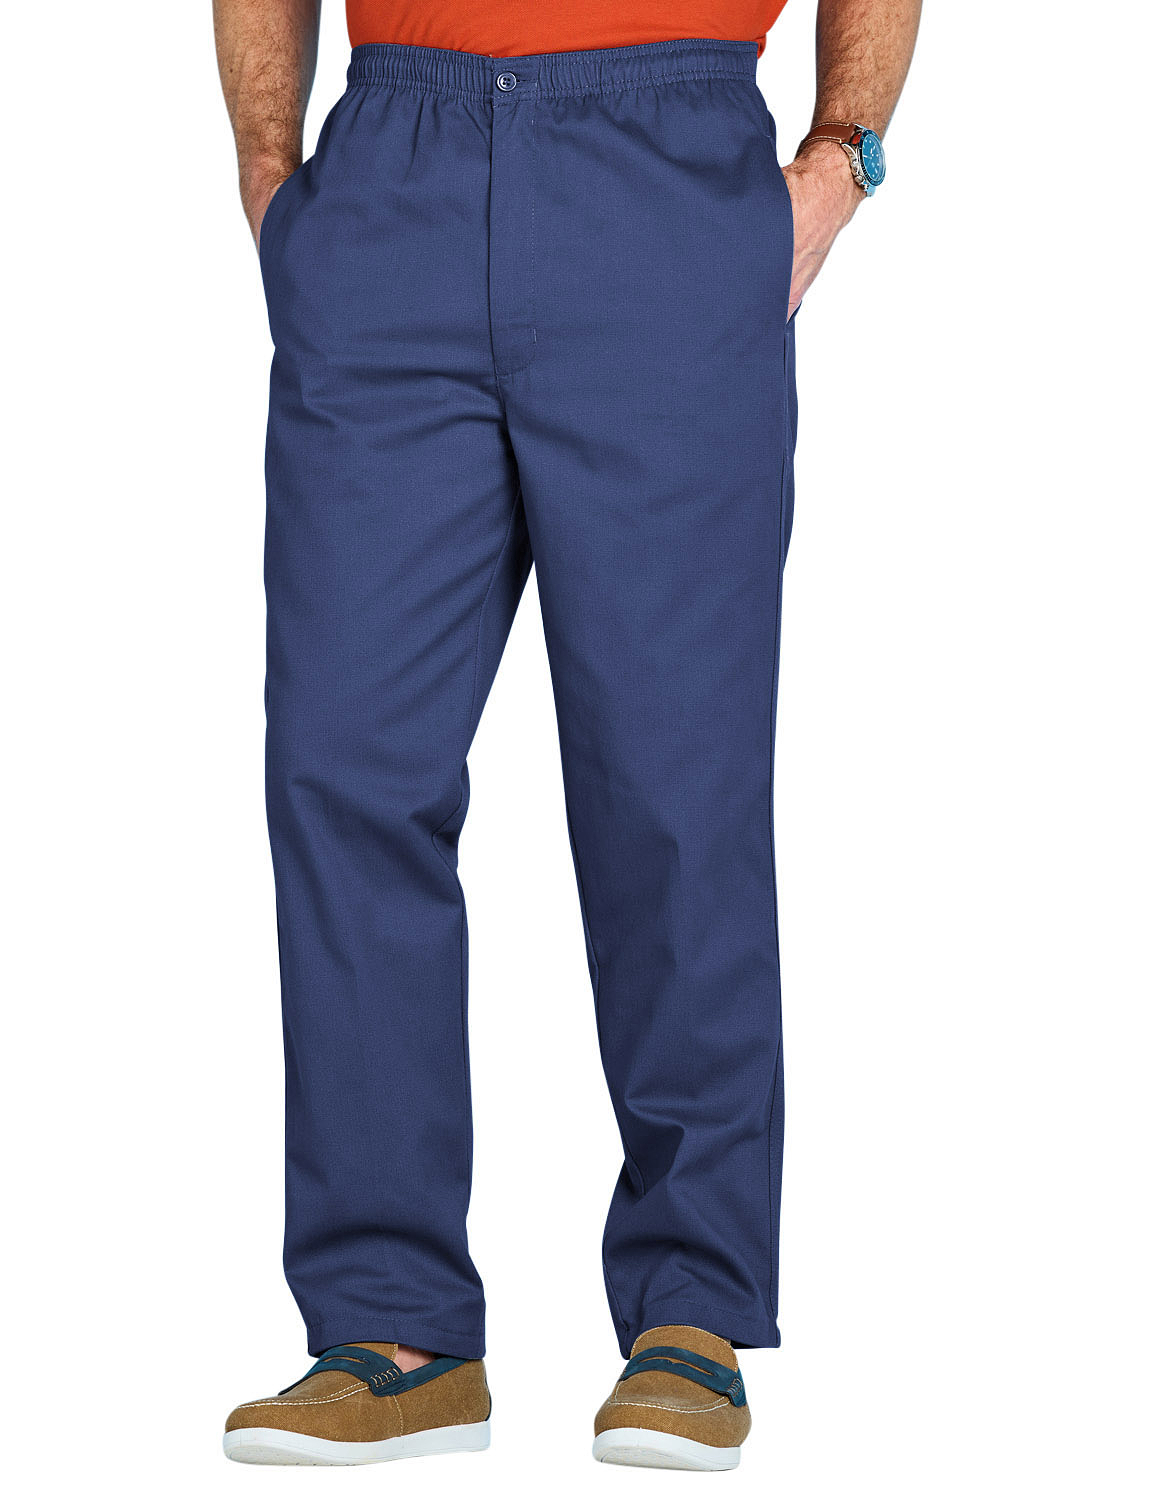 Cotton Trousers With Growing Room - Menswear Trousers